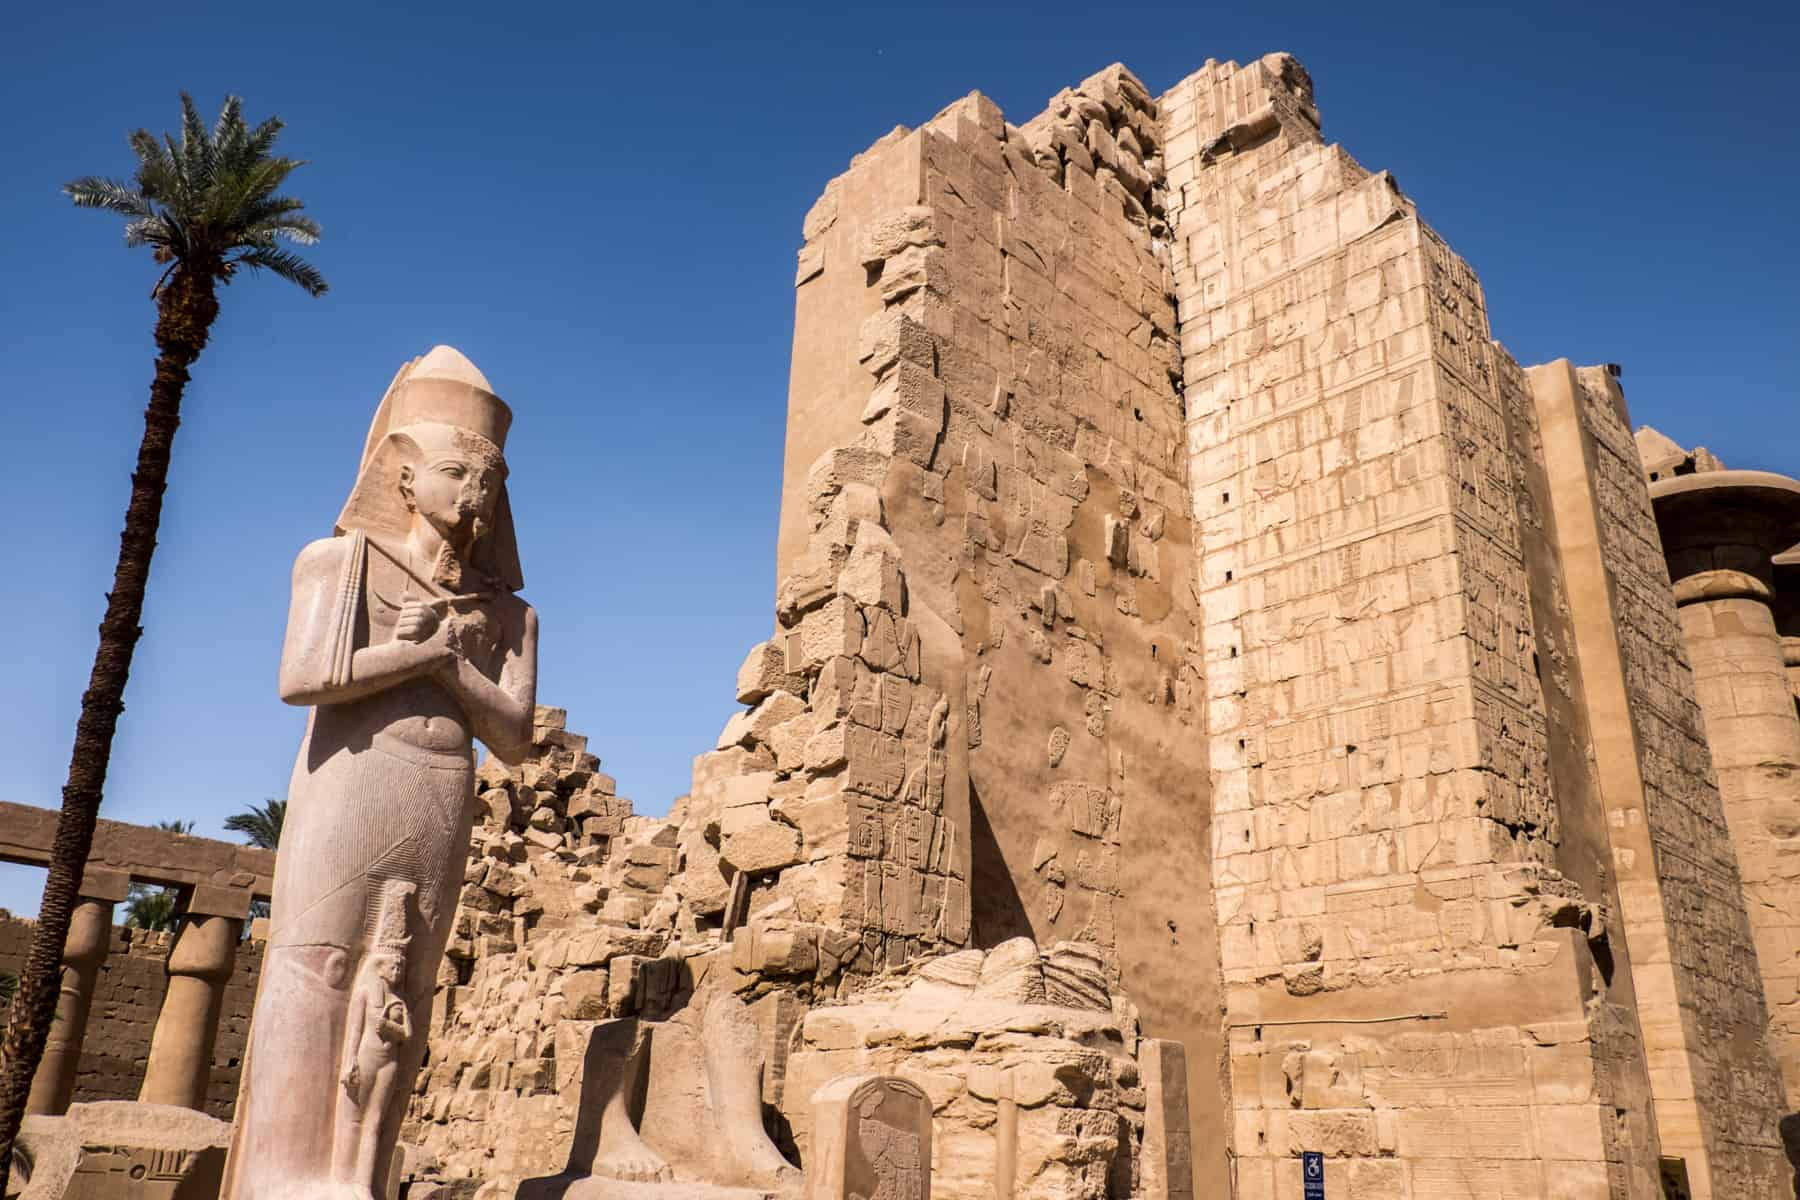 A statue and tall, crumbling stone brick walls mark on of the man entrances to the large, multi-complex structure of Karnak Temple in Luxor, Egypt